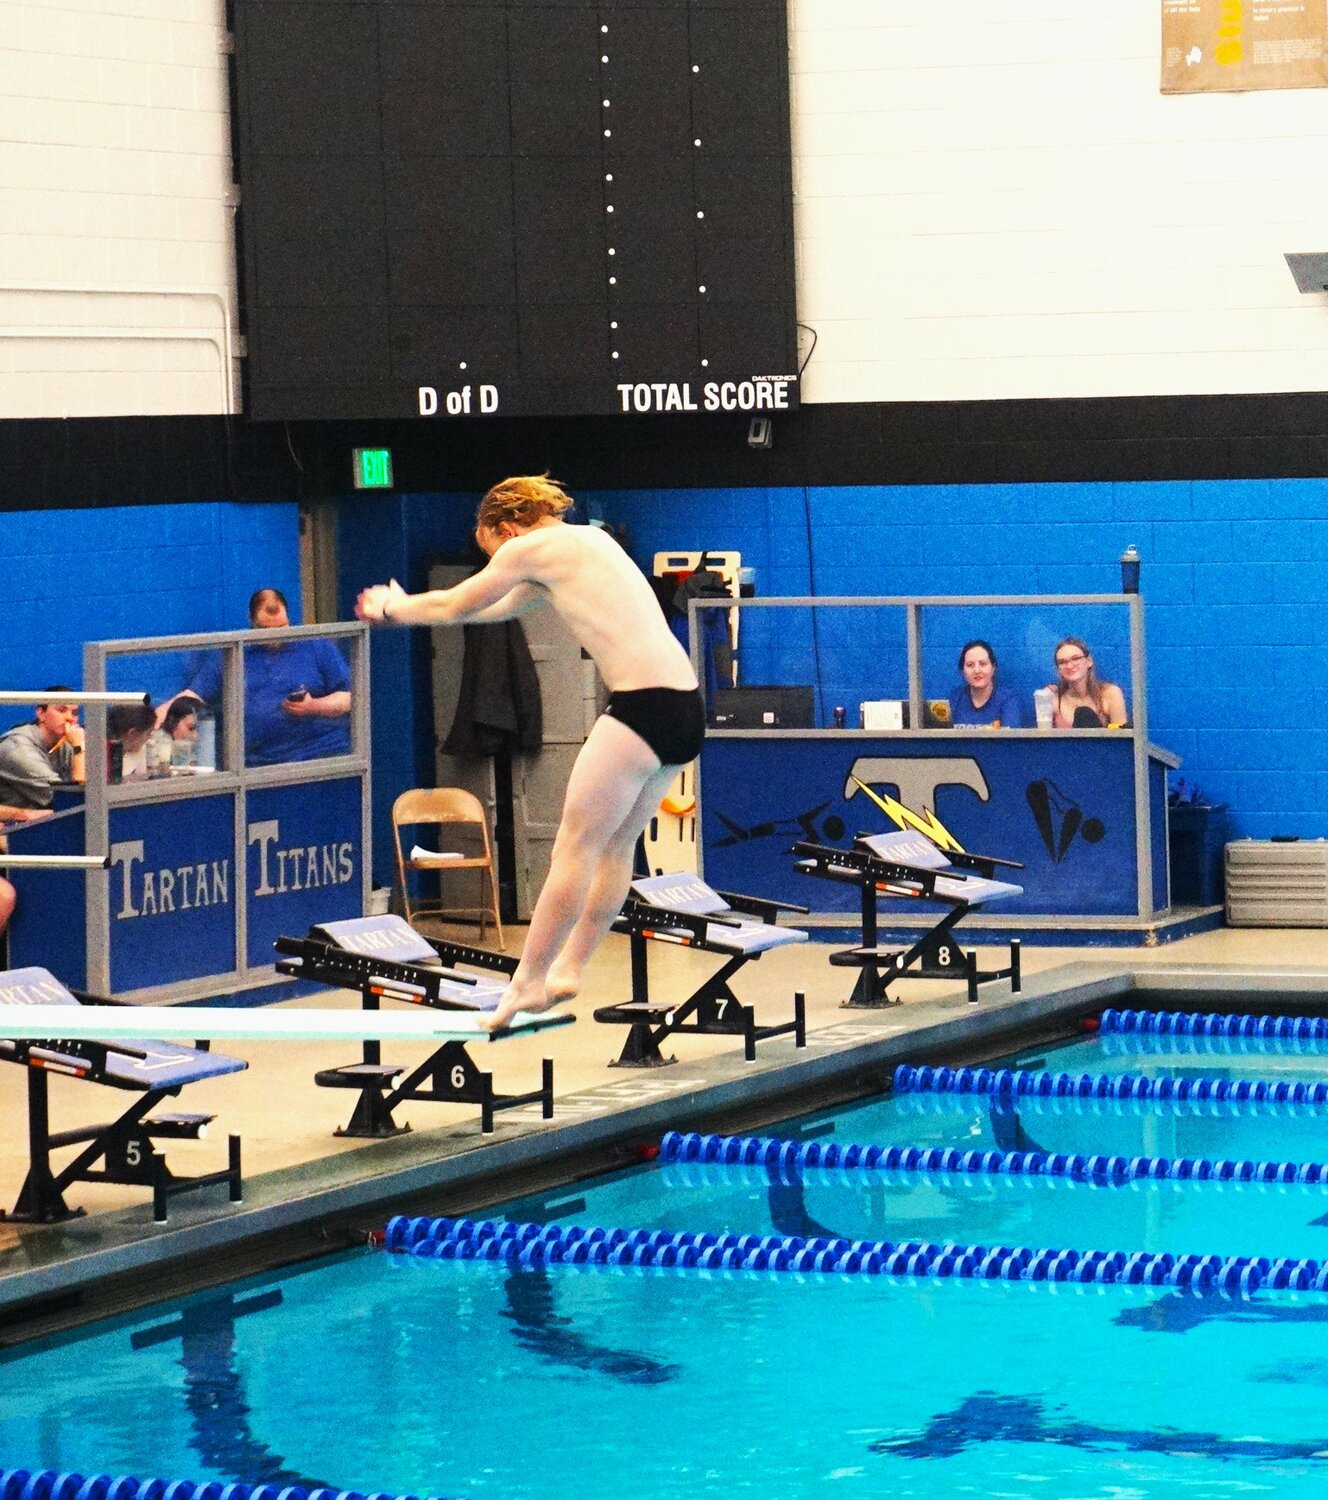 Nolan Tody is set to attempt one of his most difficult dives that he will be showcasing at sectionals this weekend, the back one and a half.